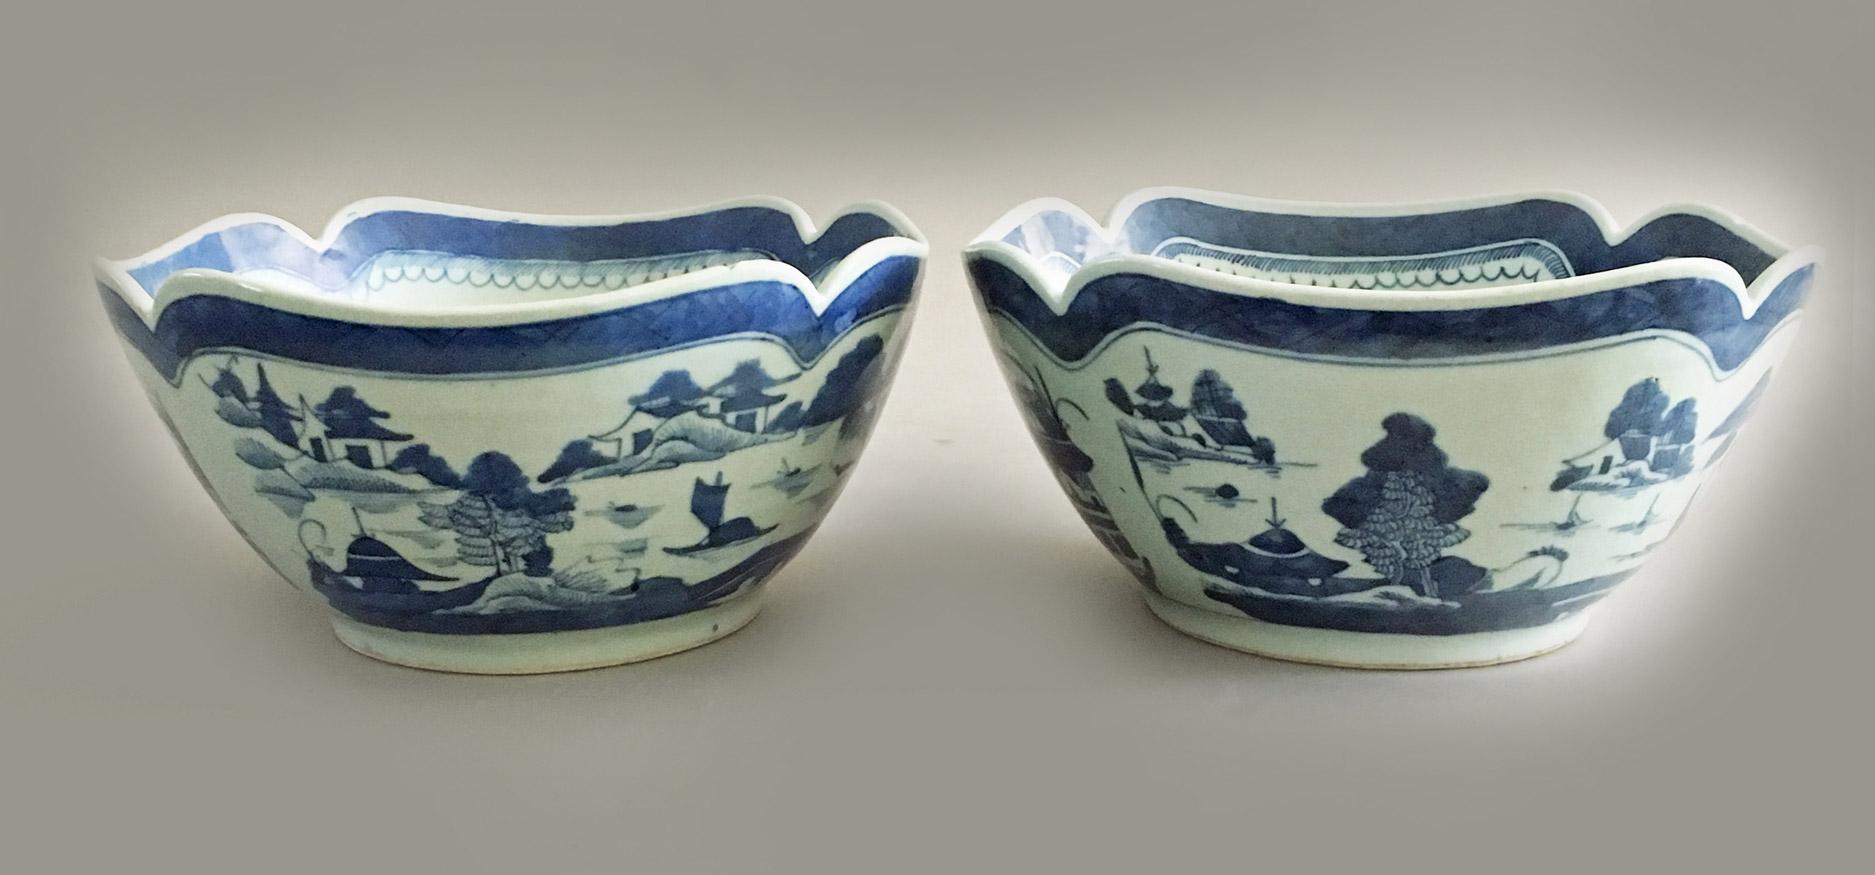 Pair of Chinese export porcelain blue and white square salad bowls with notched corners, decorated with pagodas, boats, mountains, rockery and trees. The interior of the bowl has a similar scene of pagodas in the center bottom with a wide blue